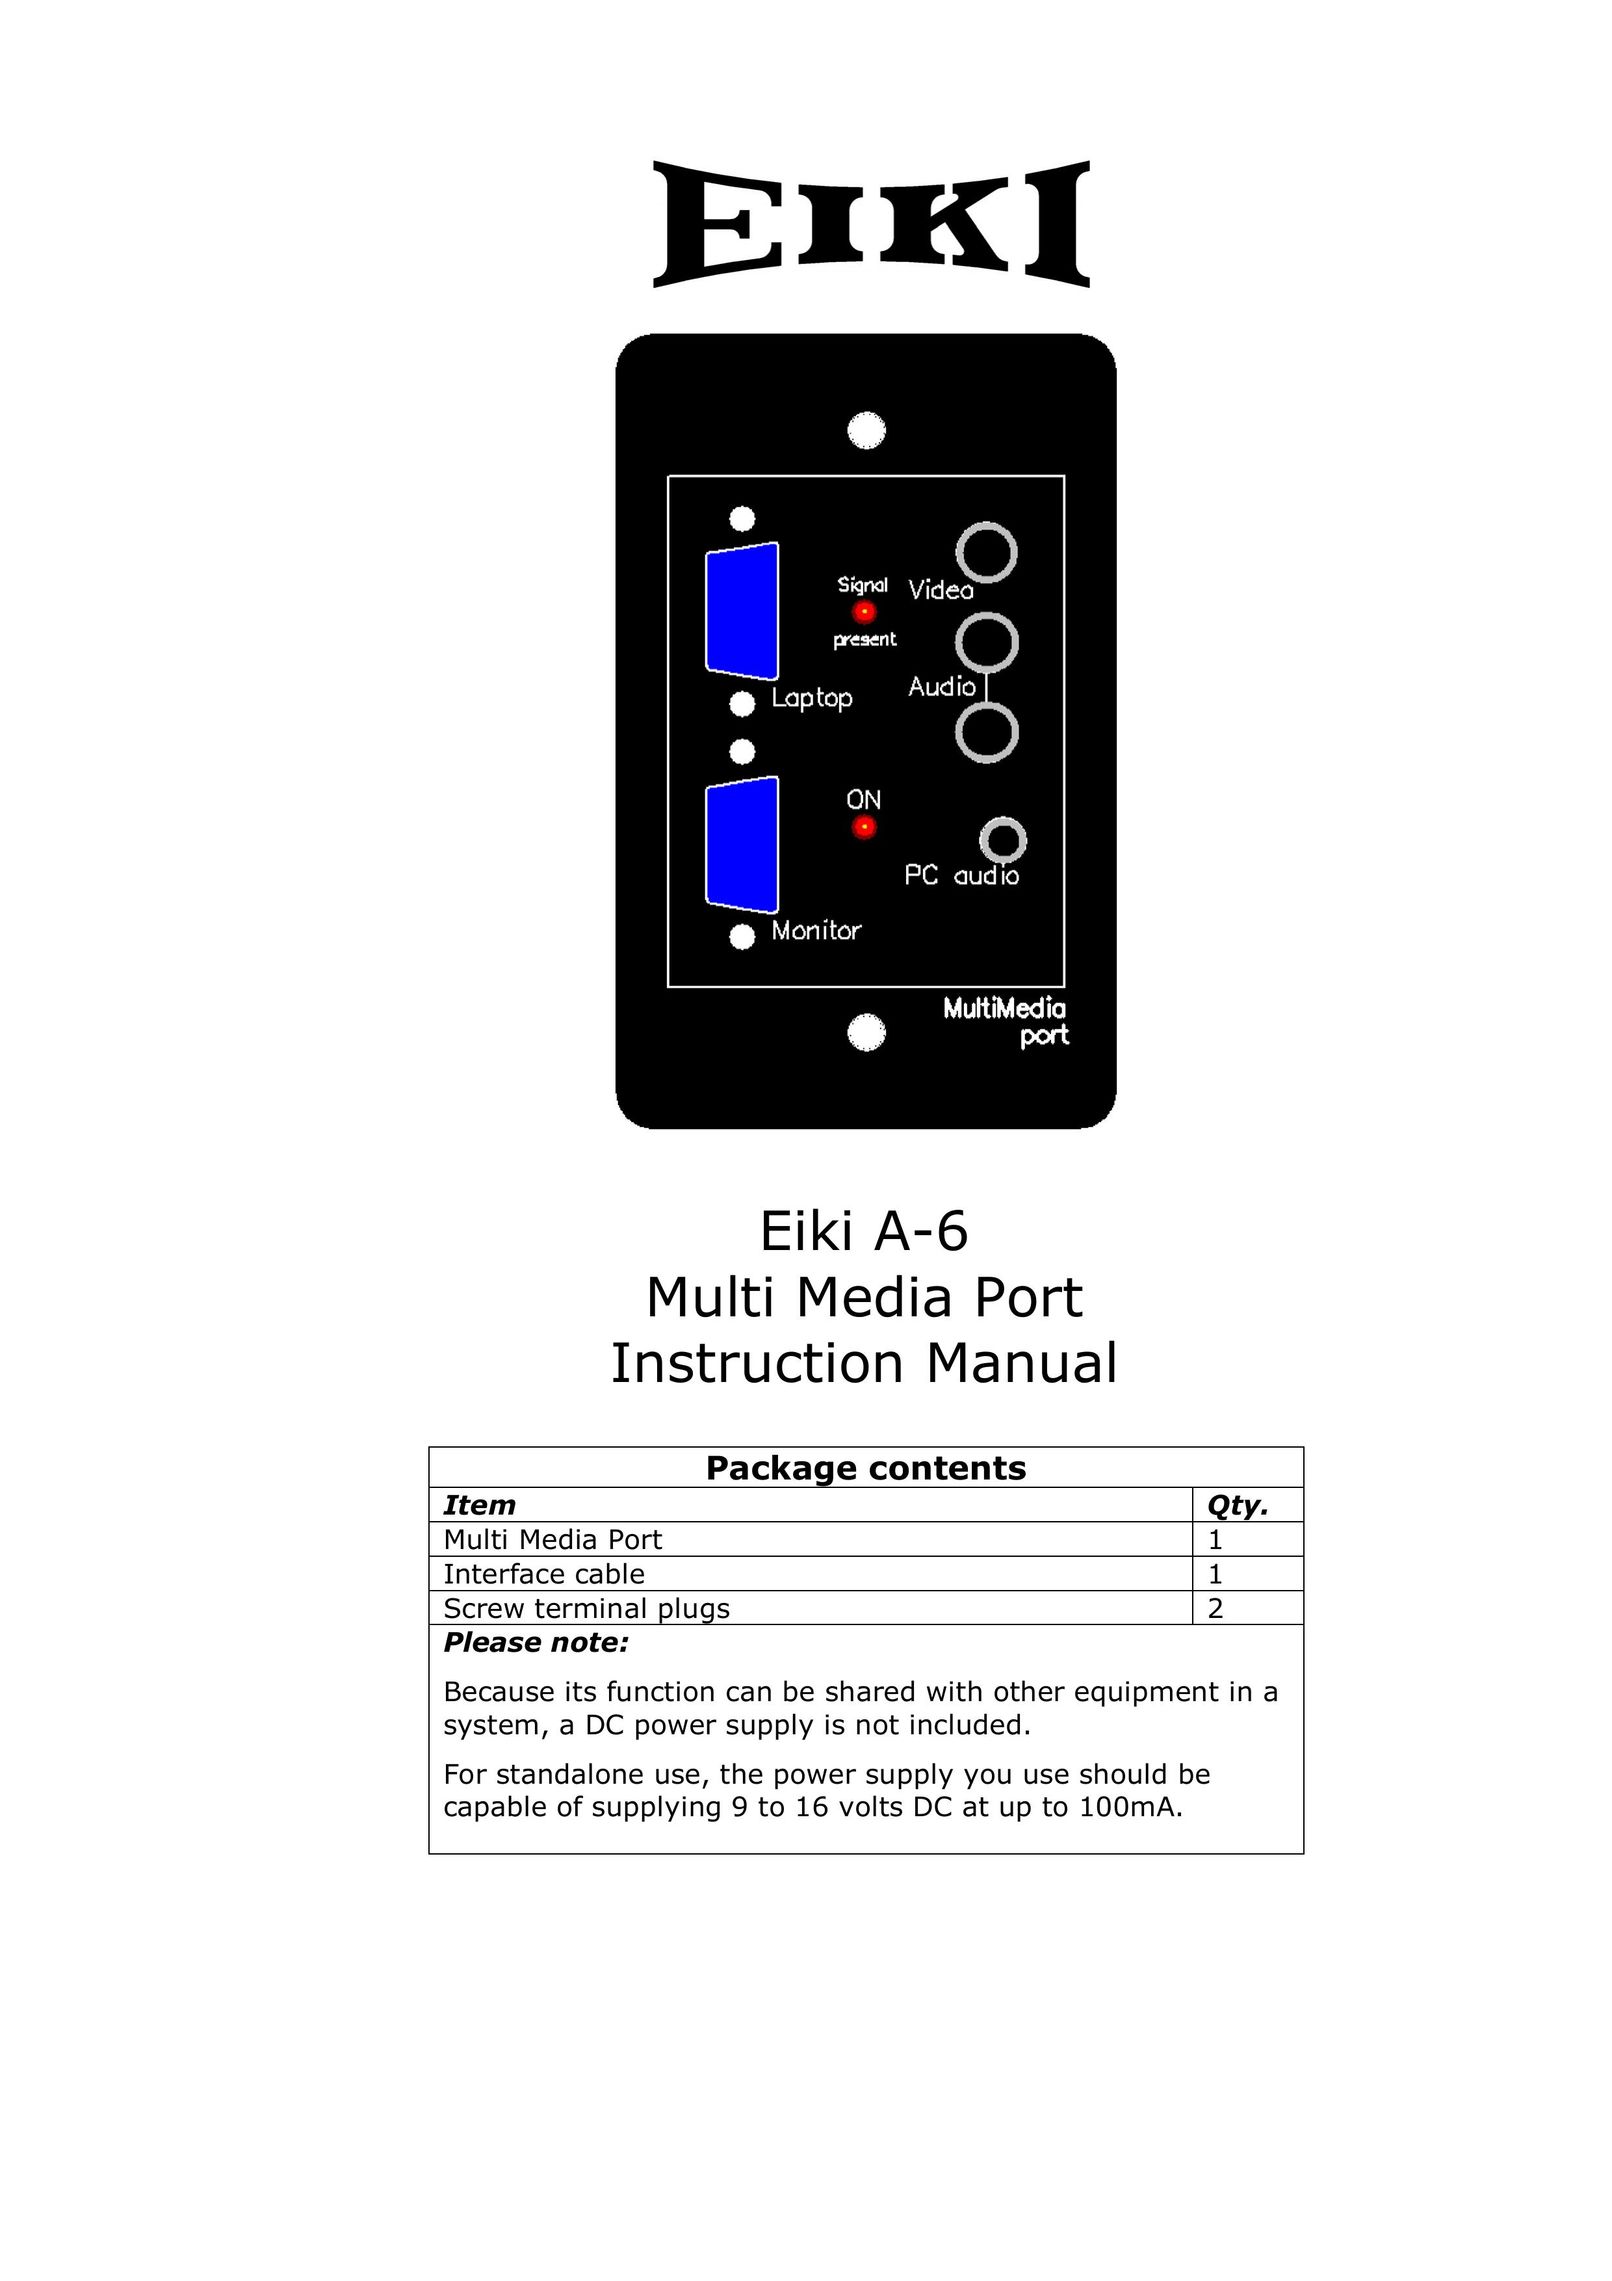 Eiki A-6 Network Card User Manual (Page 1)